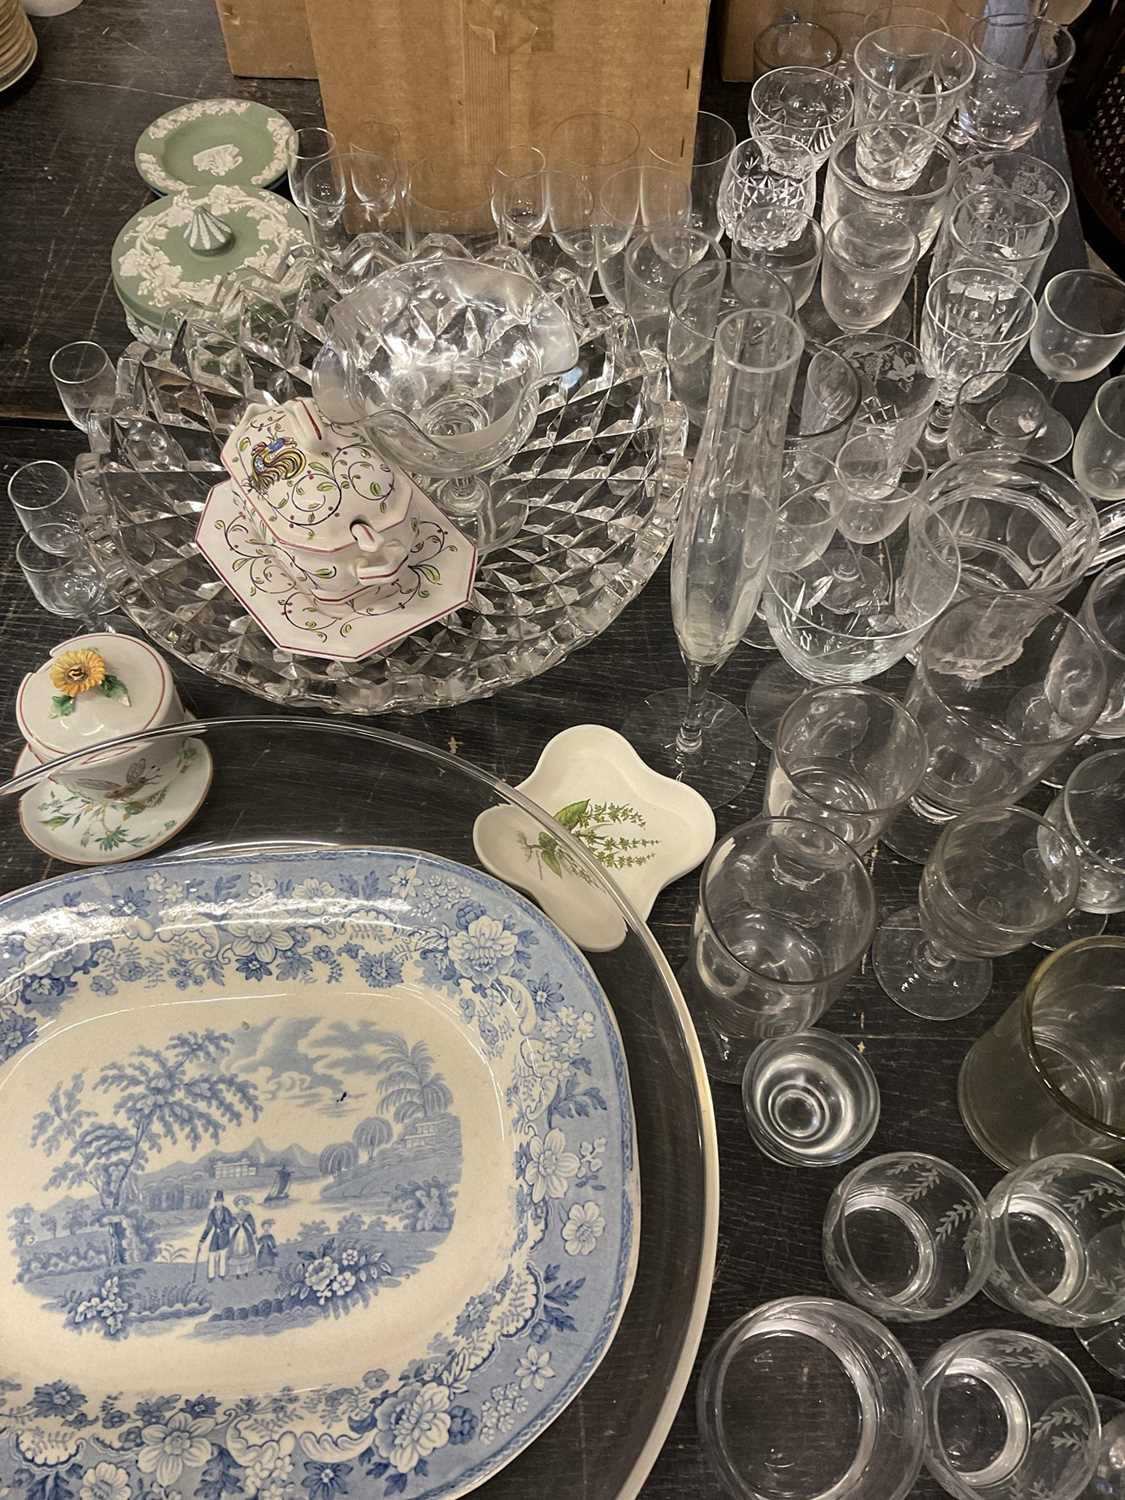 Miscellaneous glassware, 19th century and later